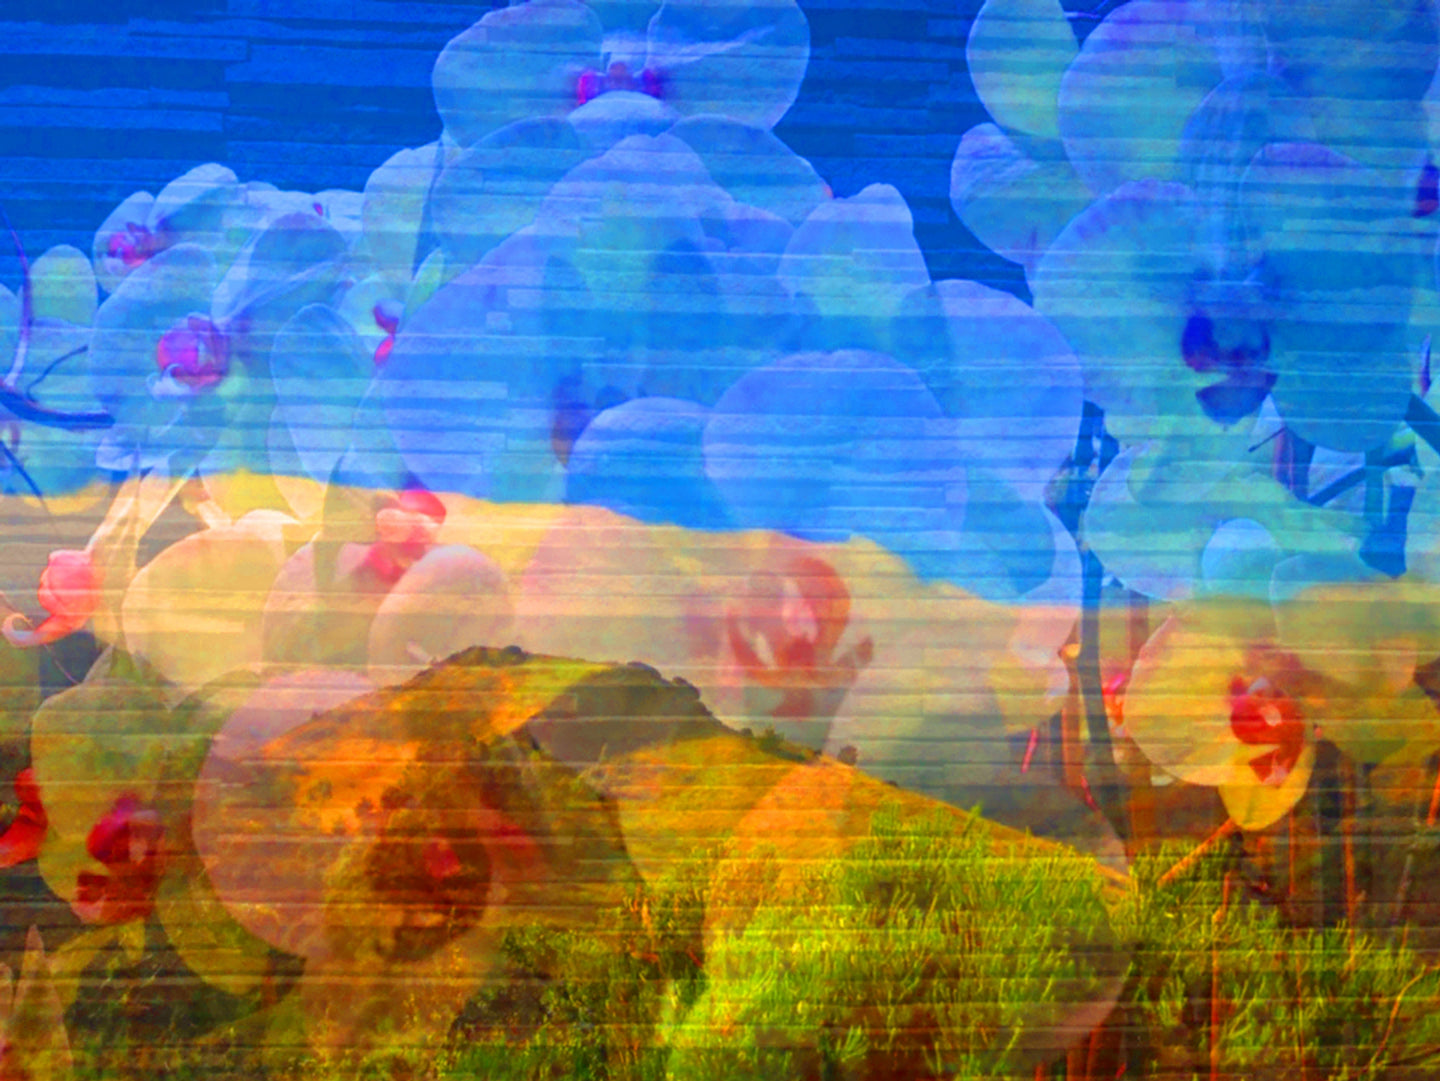 This art photography piece in nature and the landscape combines mountains, flowers, and textured abstract art in California with enhanced beauty.